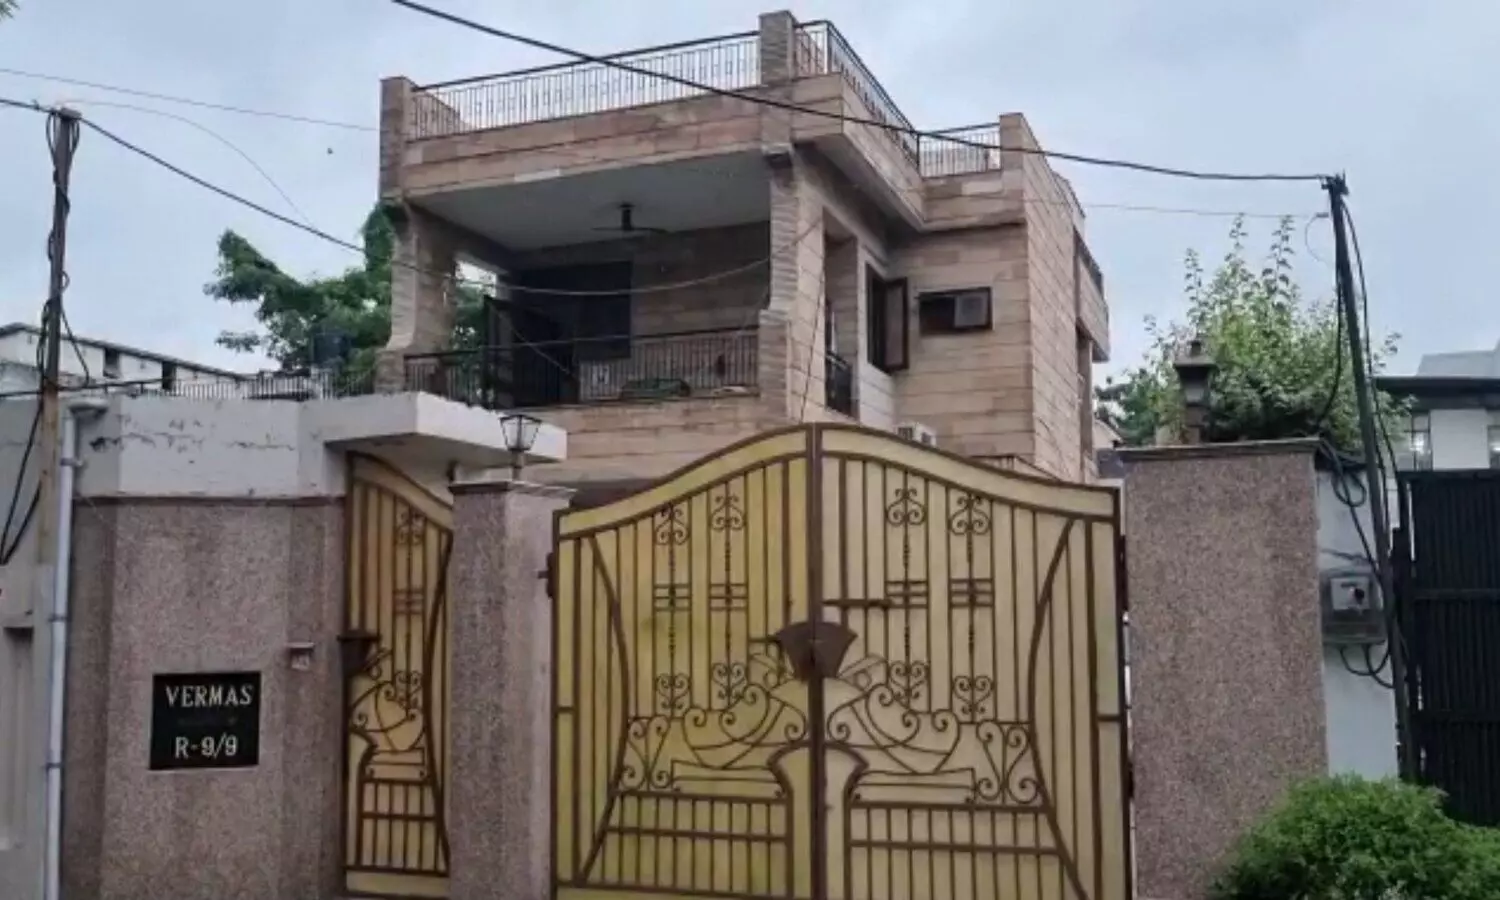 Thief looted lacs of rupees in this house